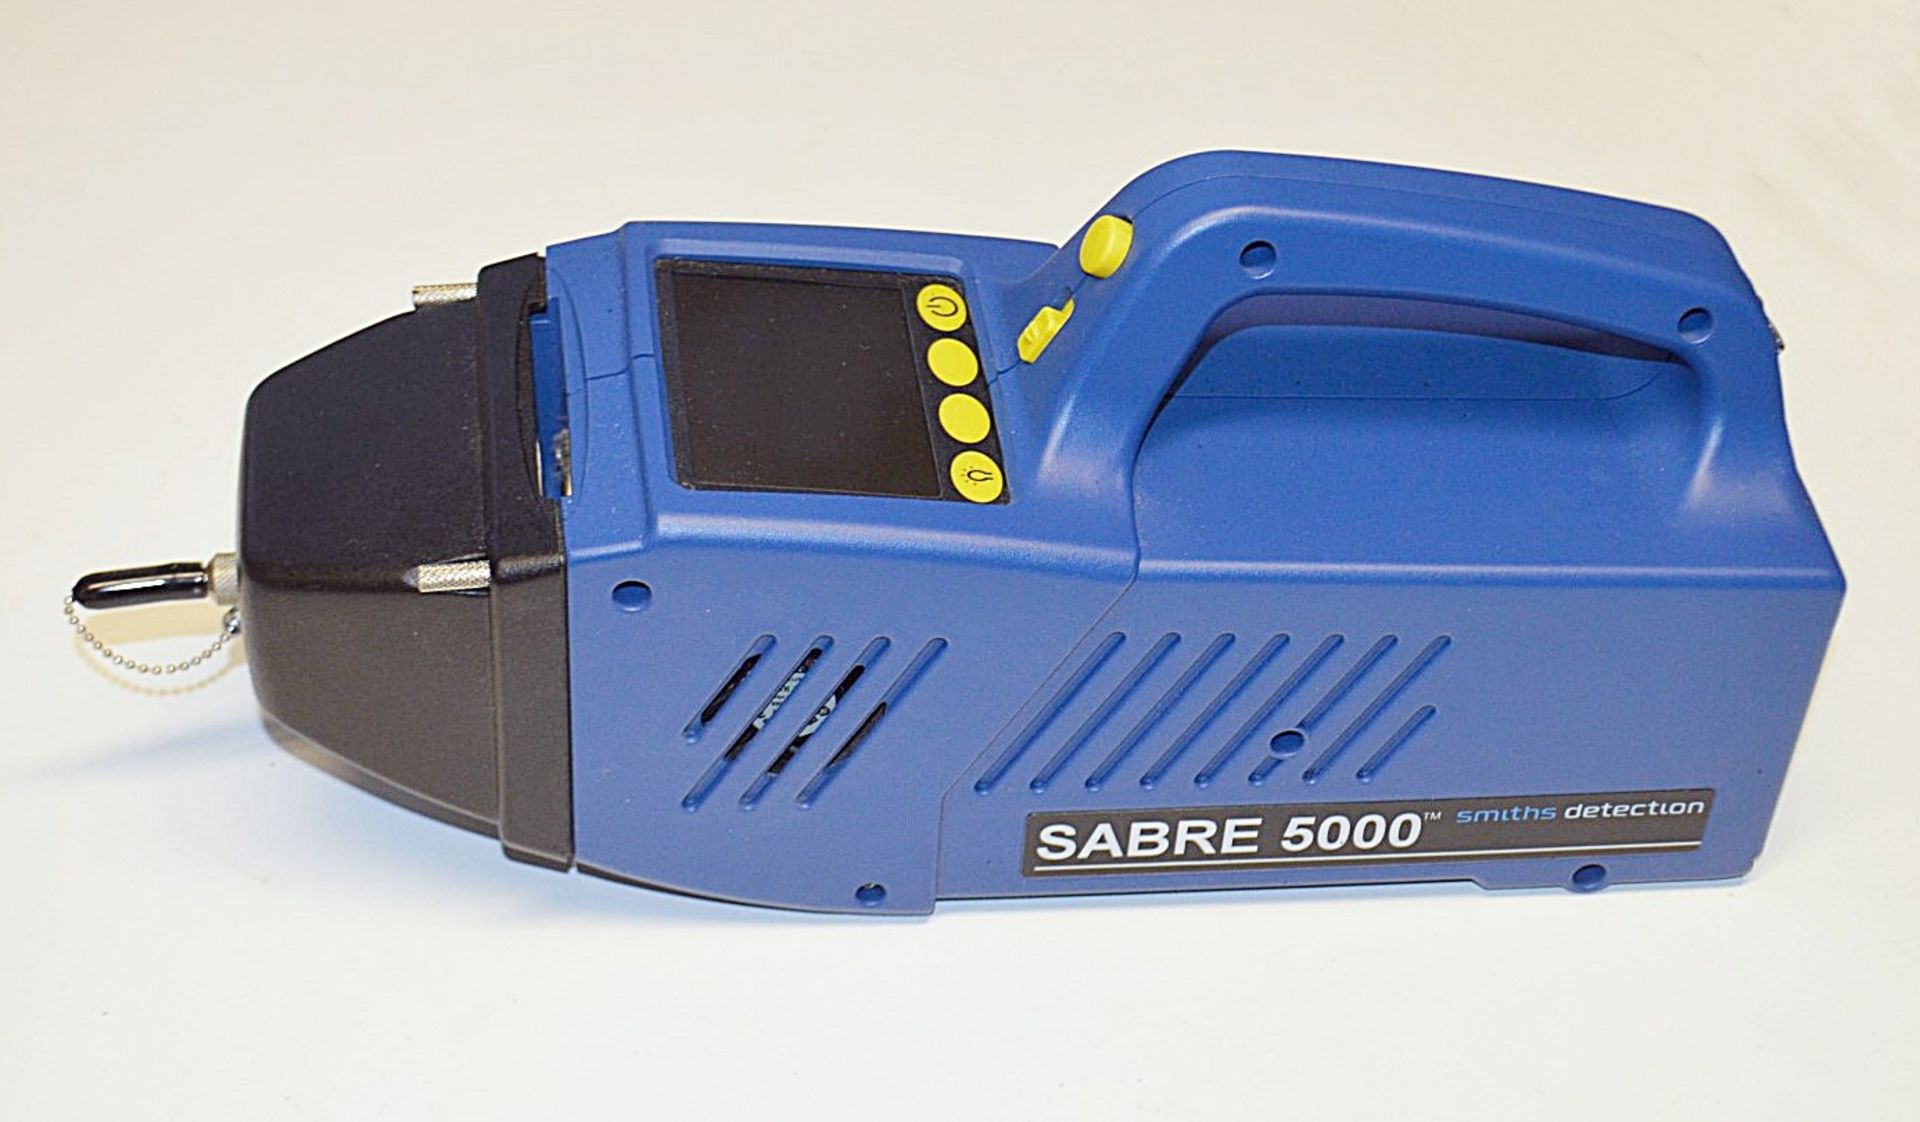 1 x SABRE™ 5000 Handheld Trace Detector - For Explosives, Chemical Agents And Toxic Chemicals - Image 11 of 31